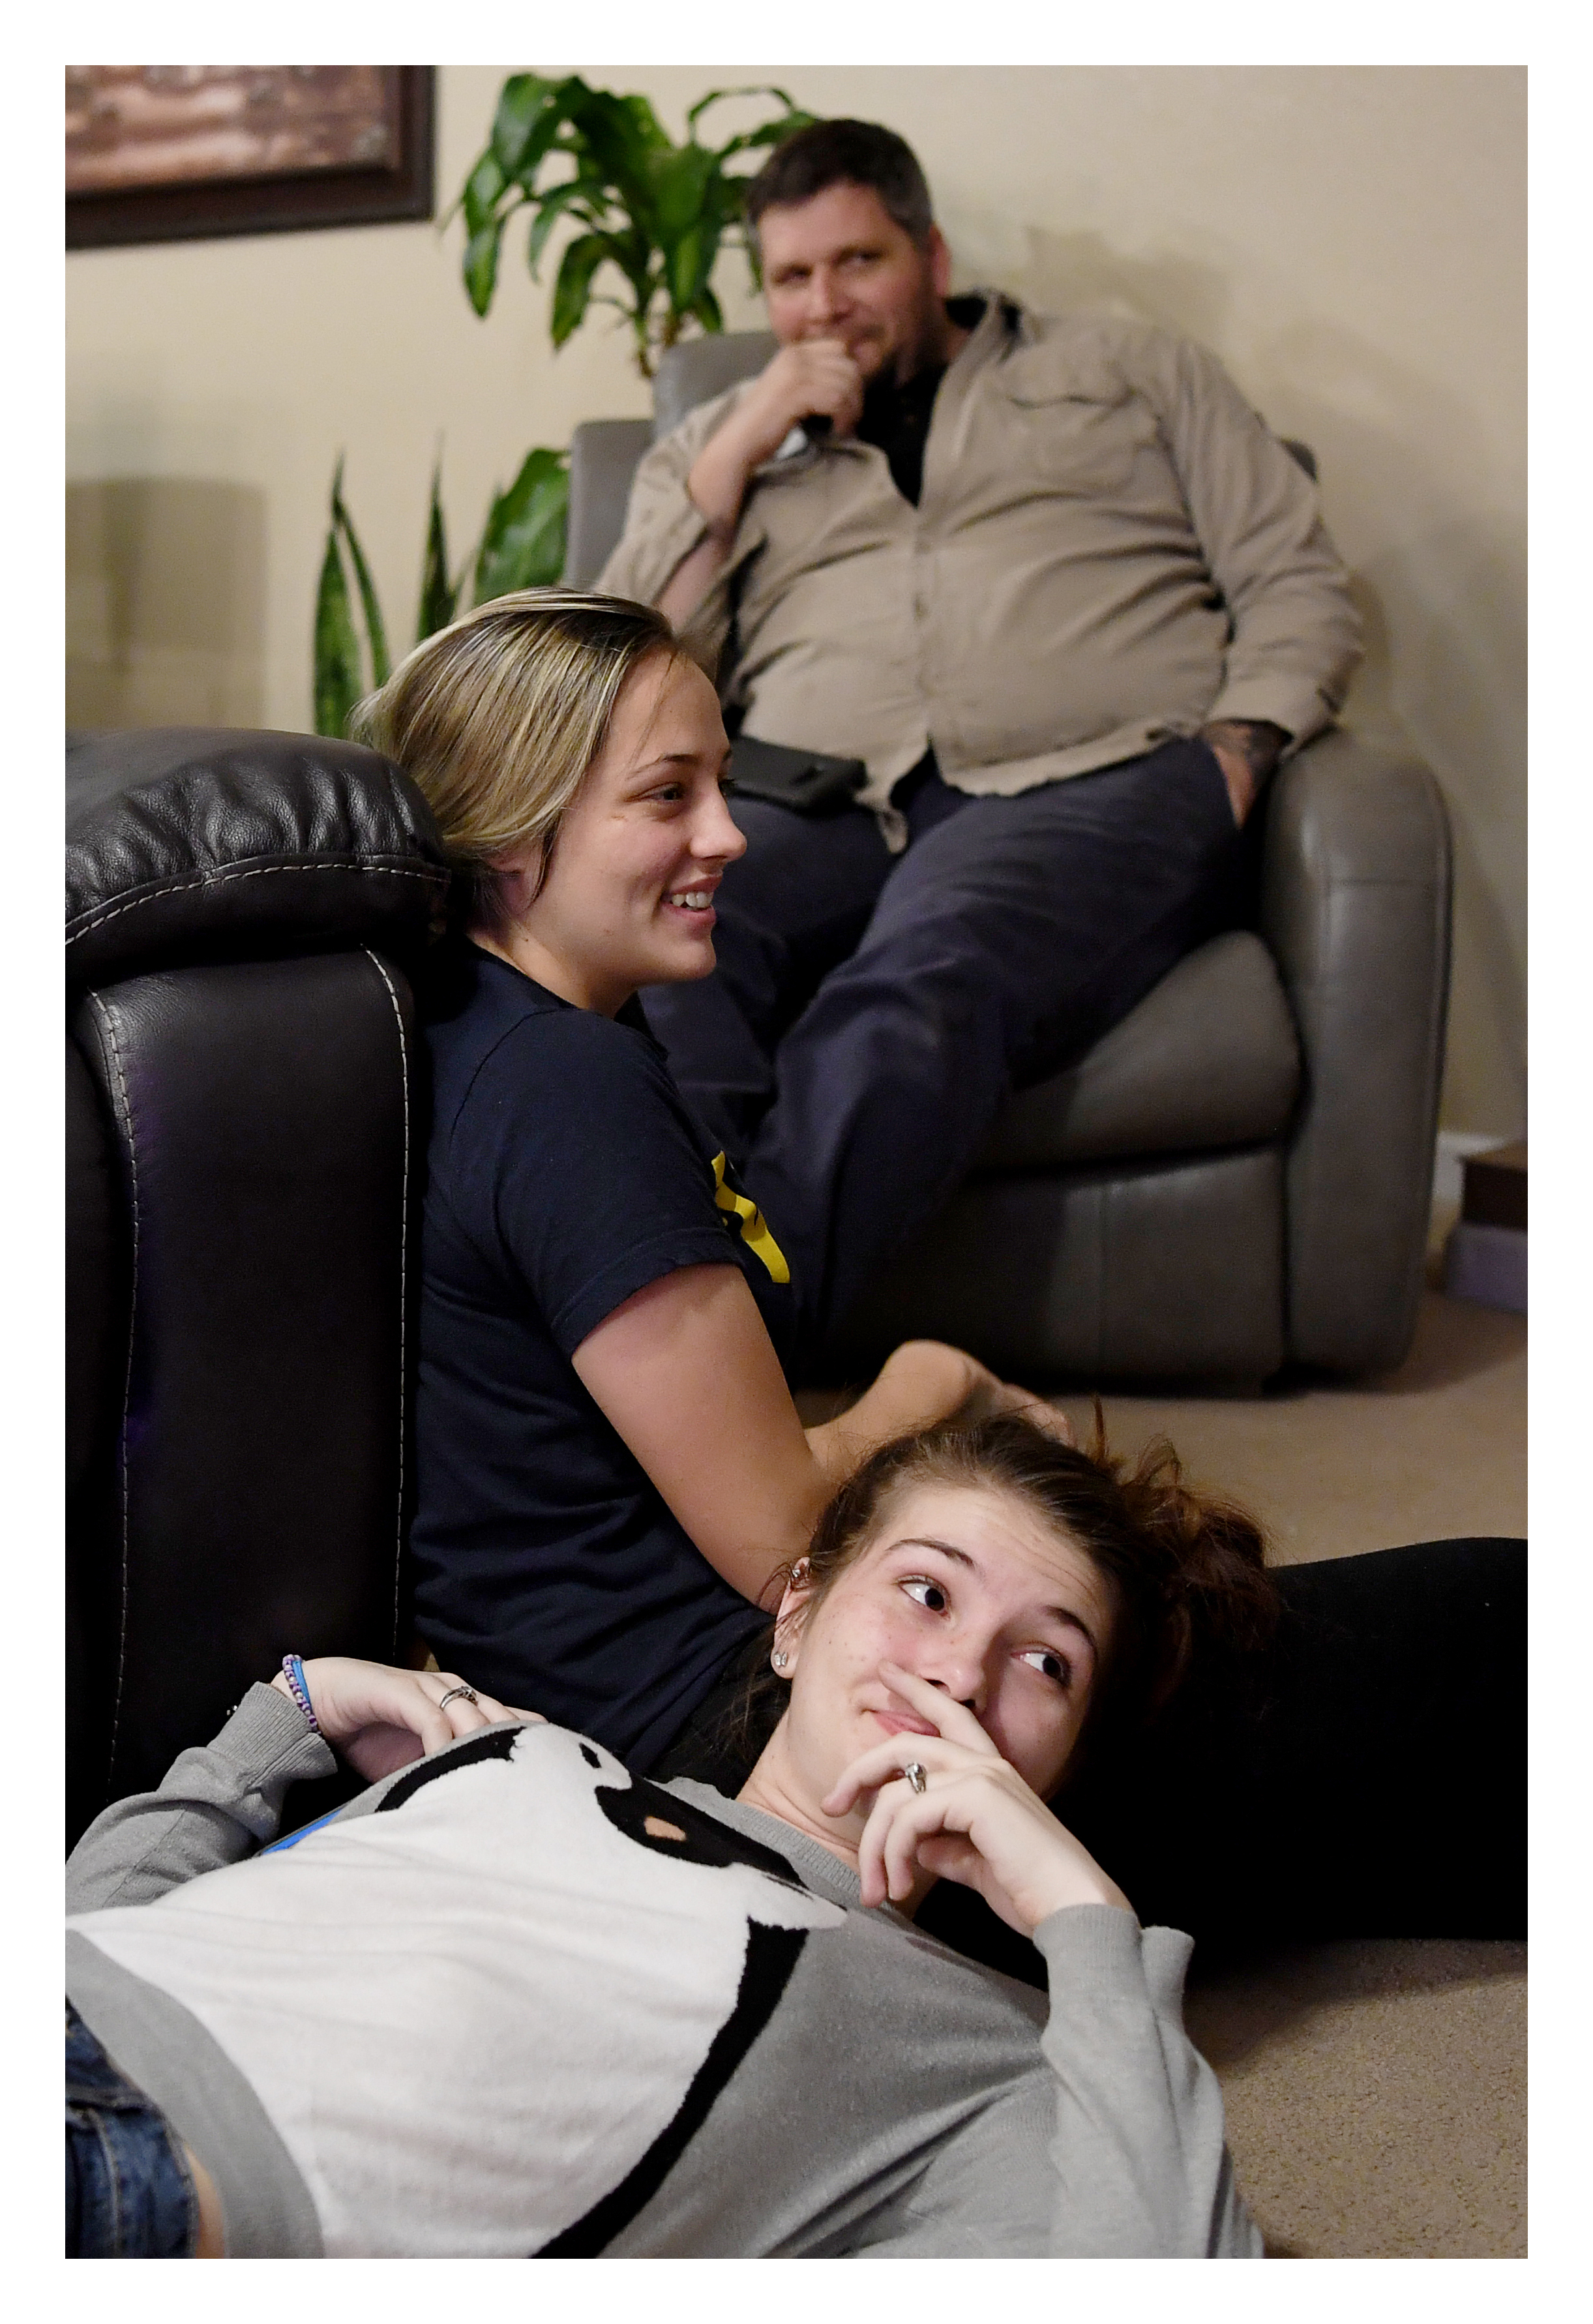  Megan Wyatt, 17, takes a break after decorating the family Christmas tree with her foster sister, Mariah, 18, and her father, Zack, November 30, 2017. 